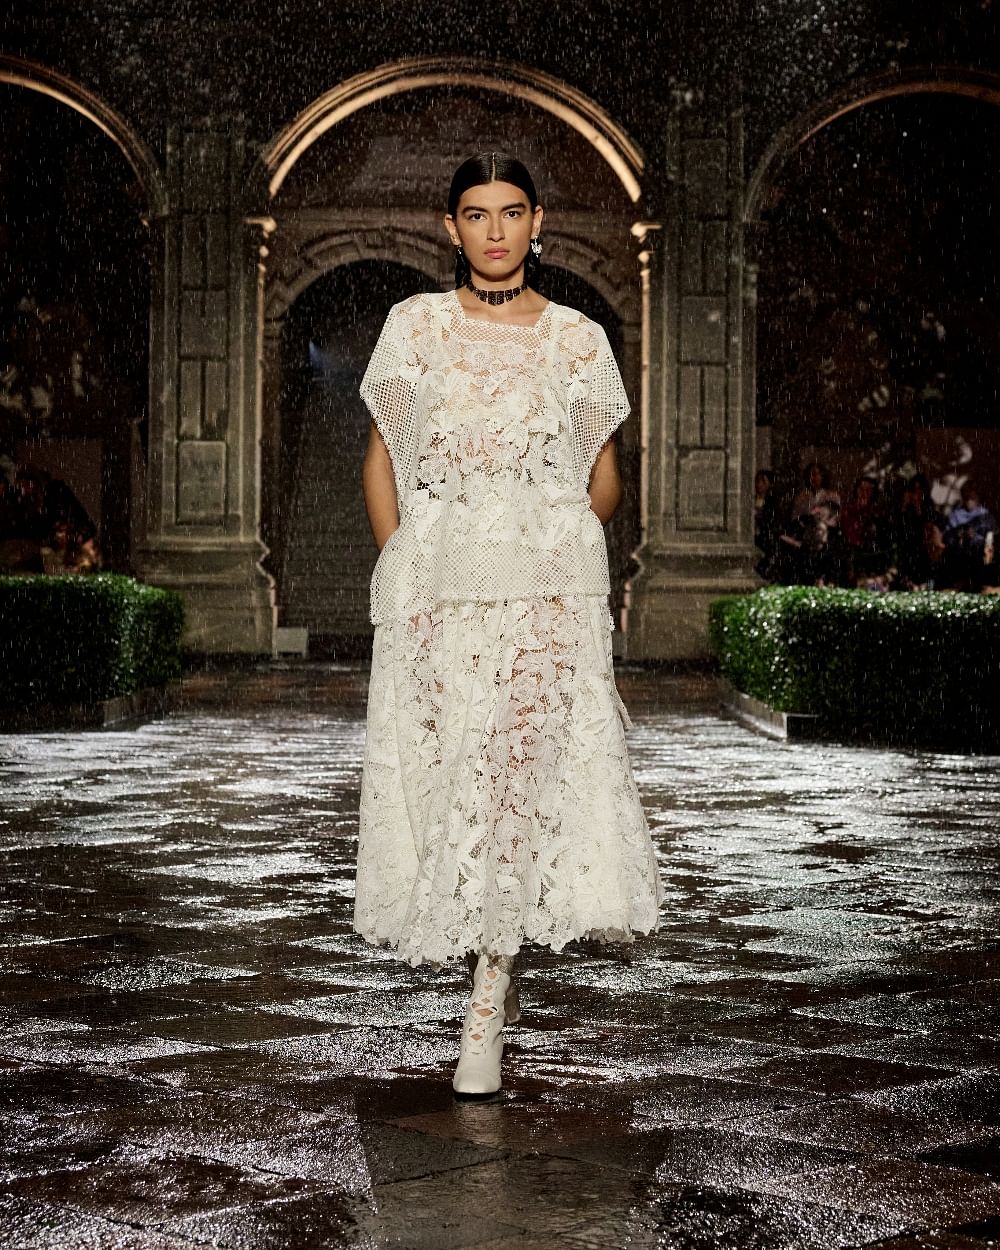 Dior's Kahlo-Inspired Cruise Collection Has Singapore Connection